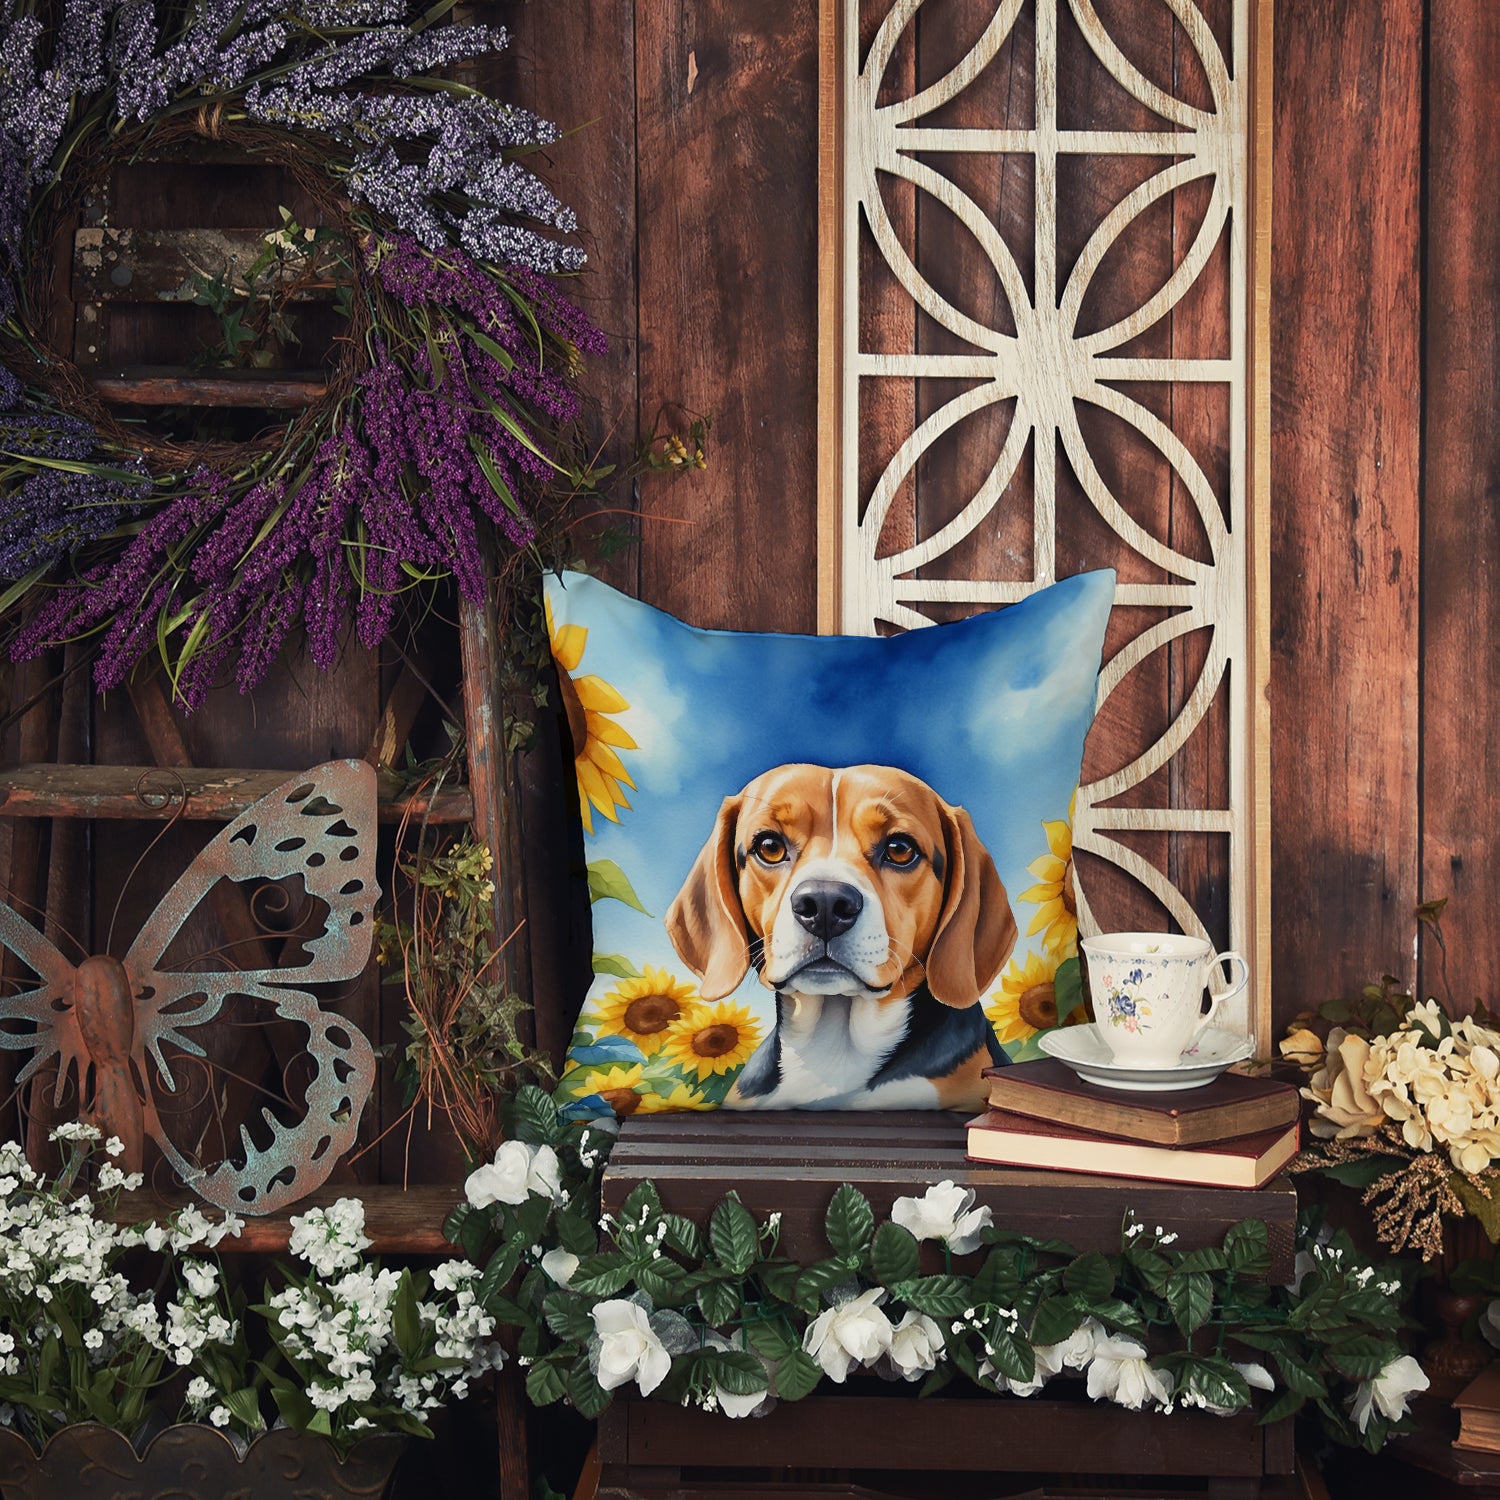 Beagle in Sunflowers Throw Pillow